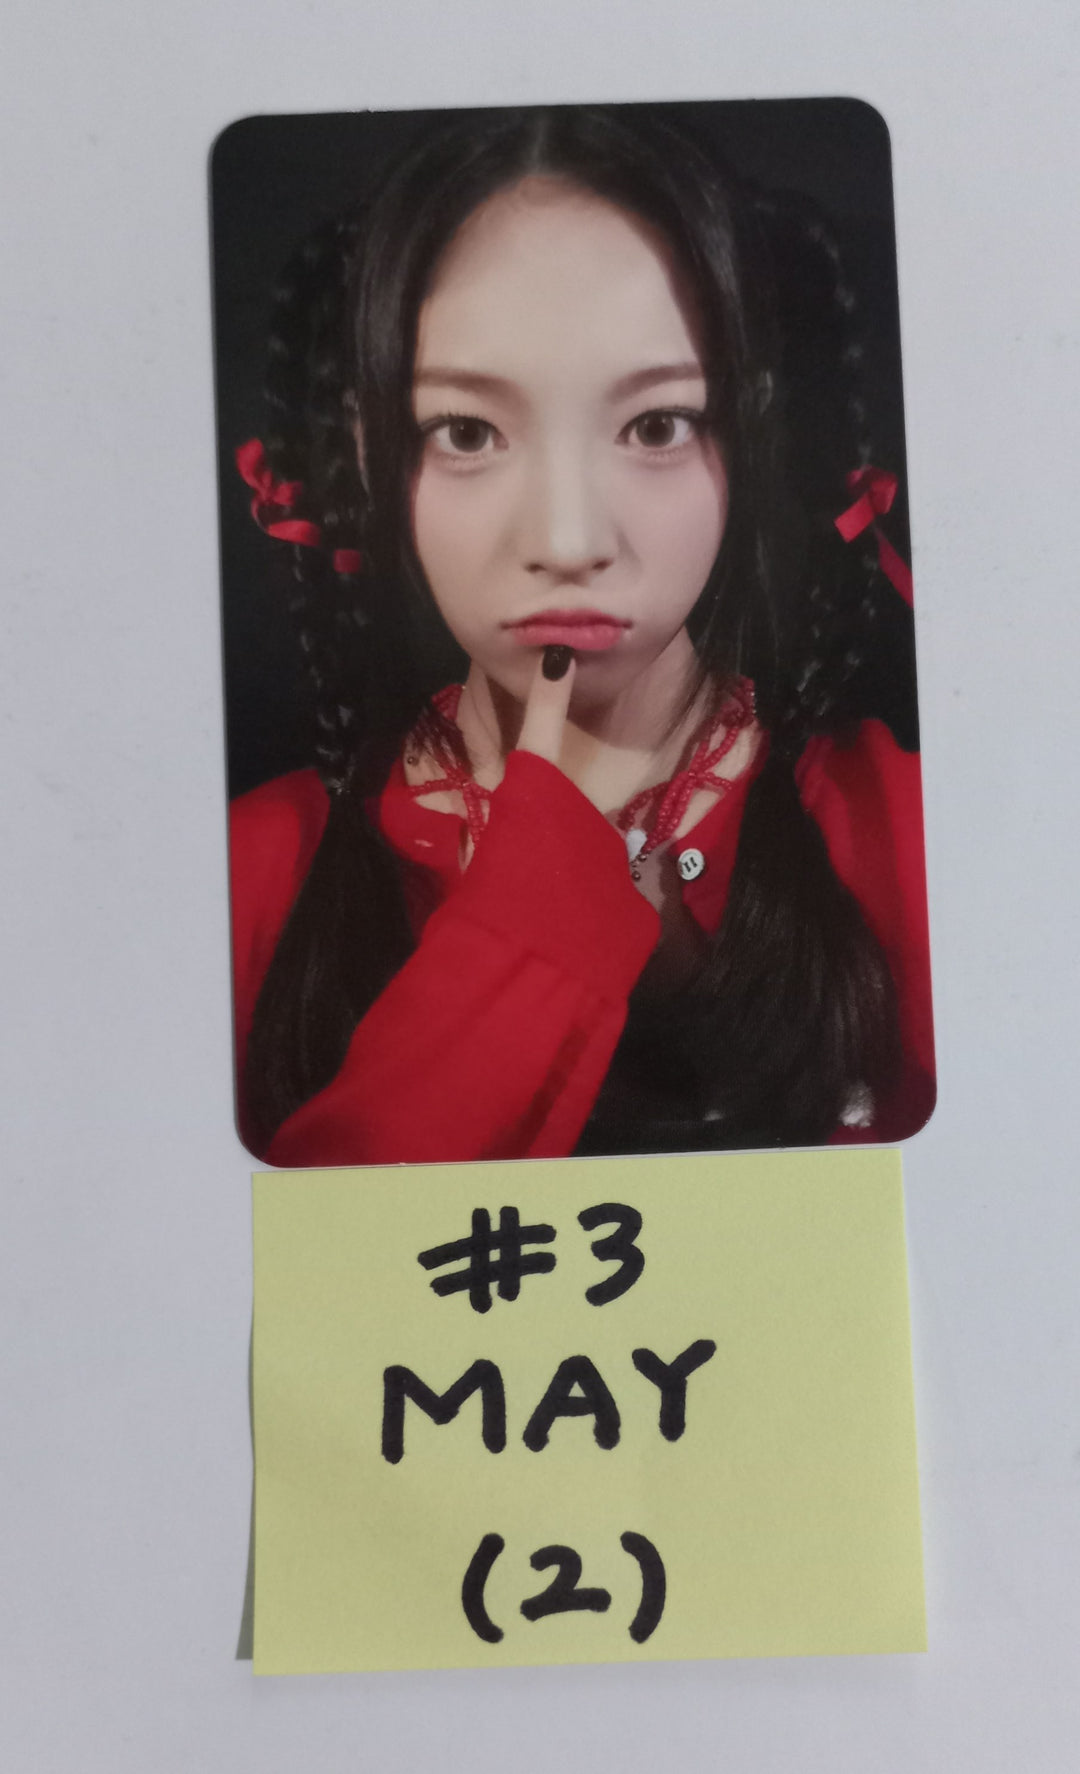 RESCENE "Re:Scene" - Official Photocard, ID Card, Message Card [24.3.27]